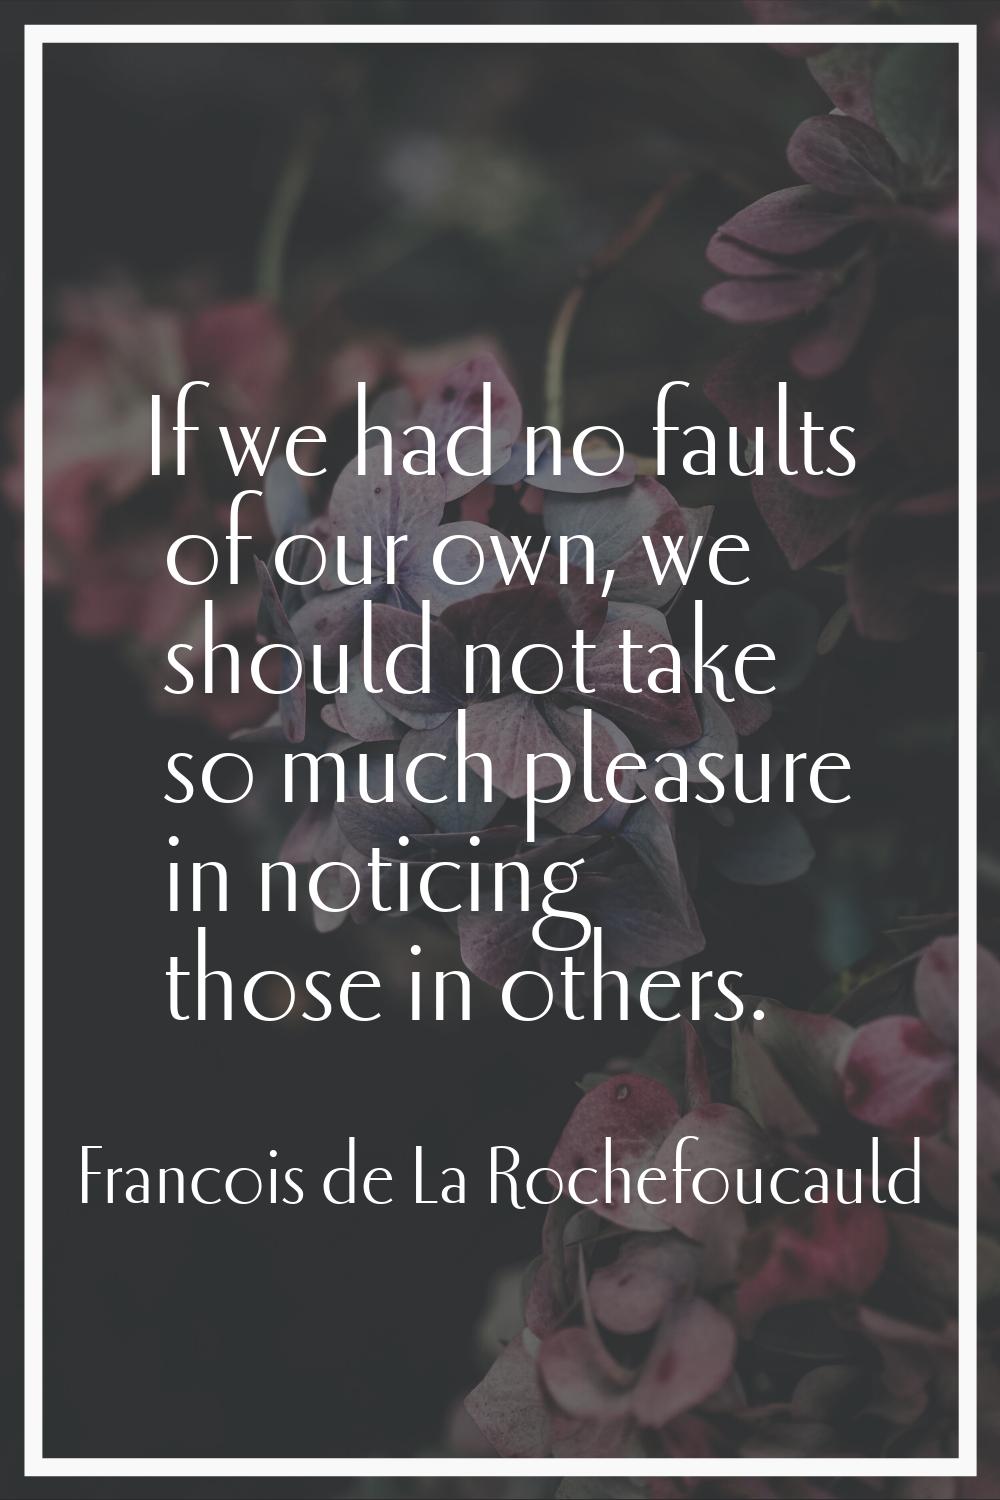 If we had no faults of our own, we should not take so much pleasure in noticing those in others.